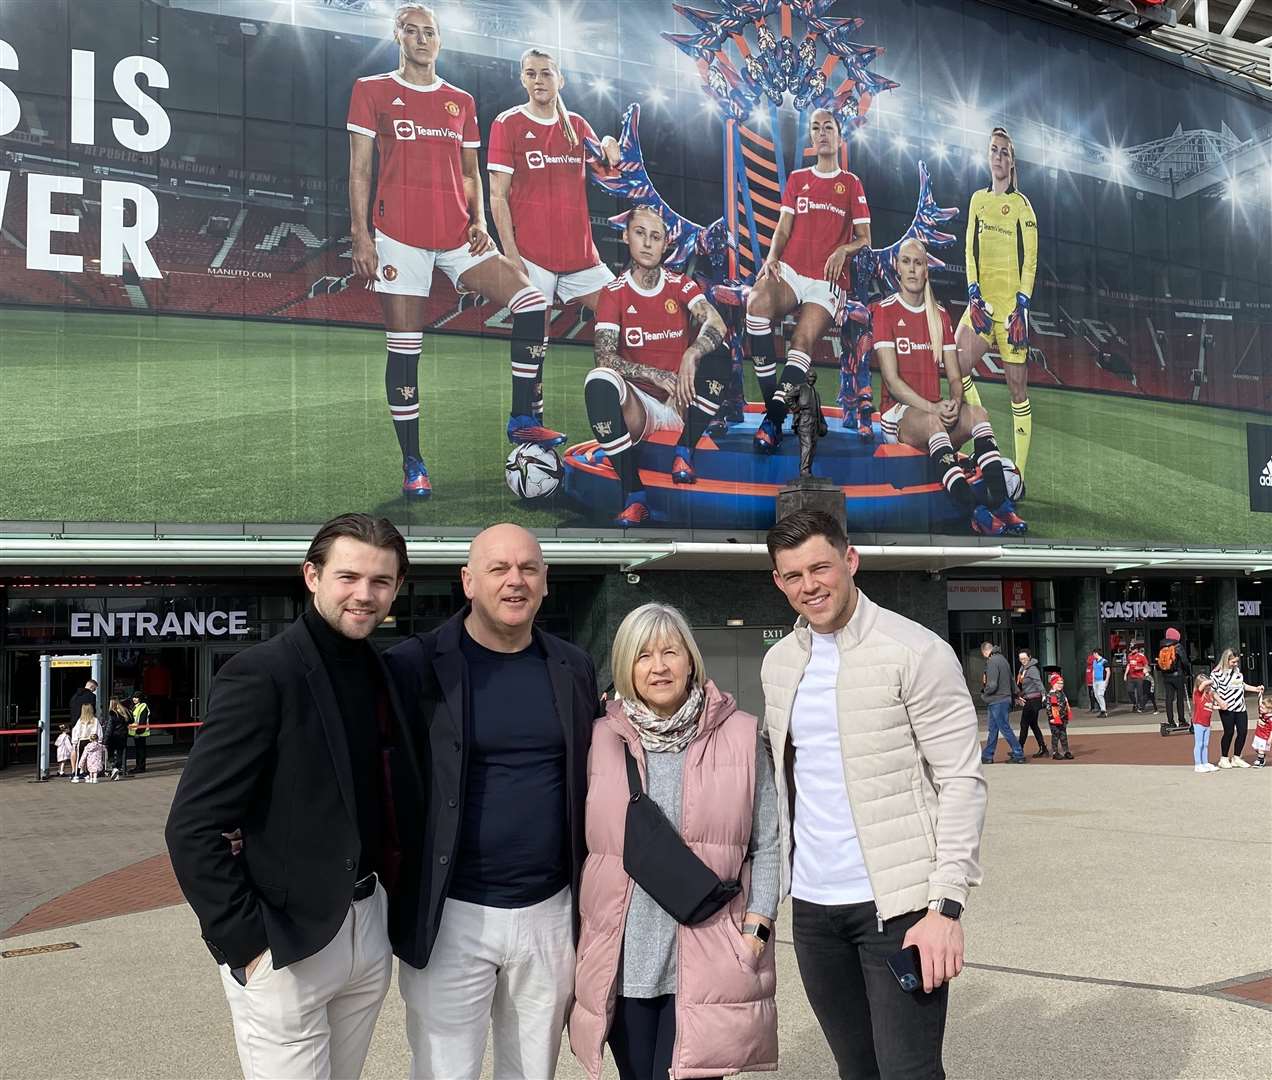 Alessia Russo's family in front of a giant photo of Alessia and her Manchester United team-mates at Old Trafford. Brothers Luca and Giorgio flank dad Mario and mum Carol